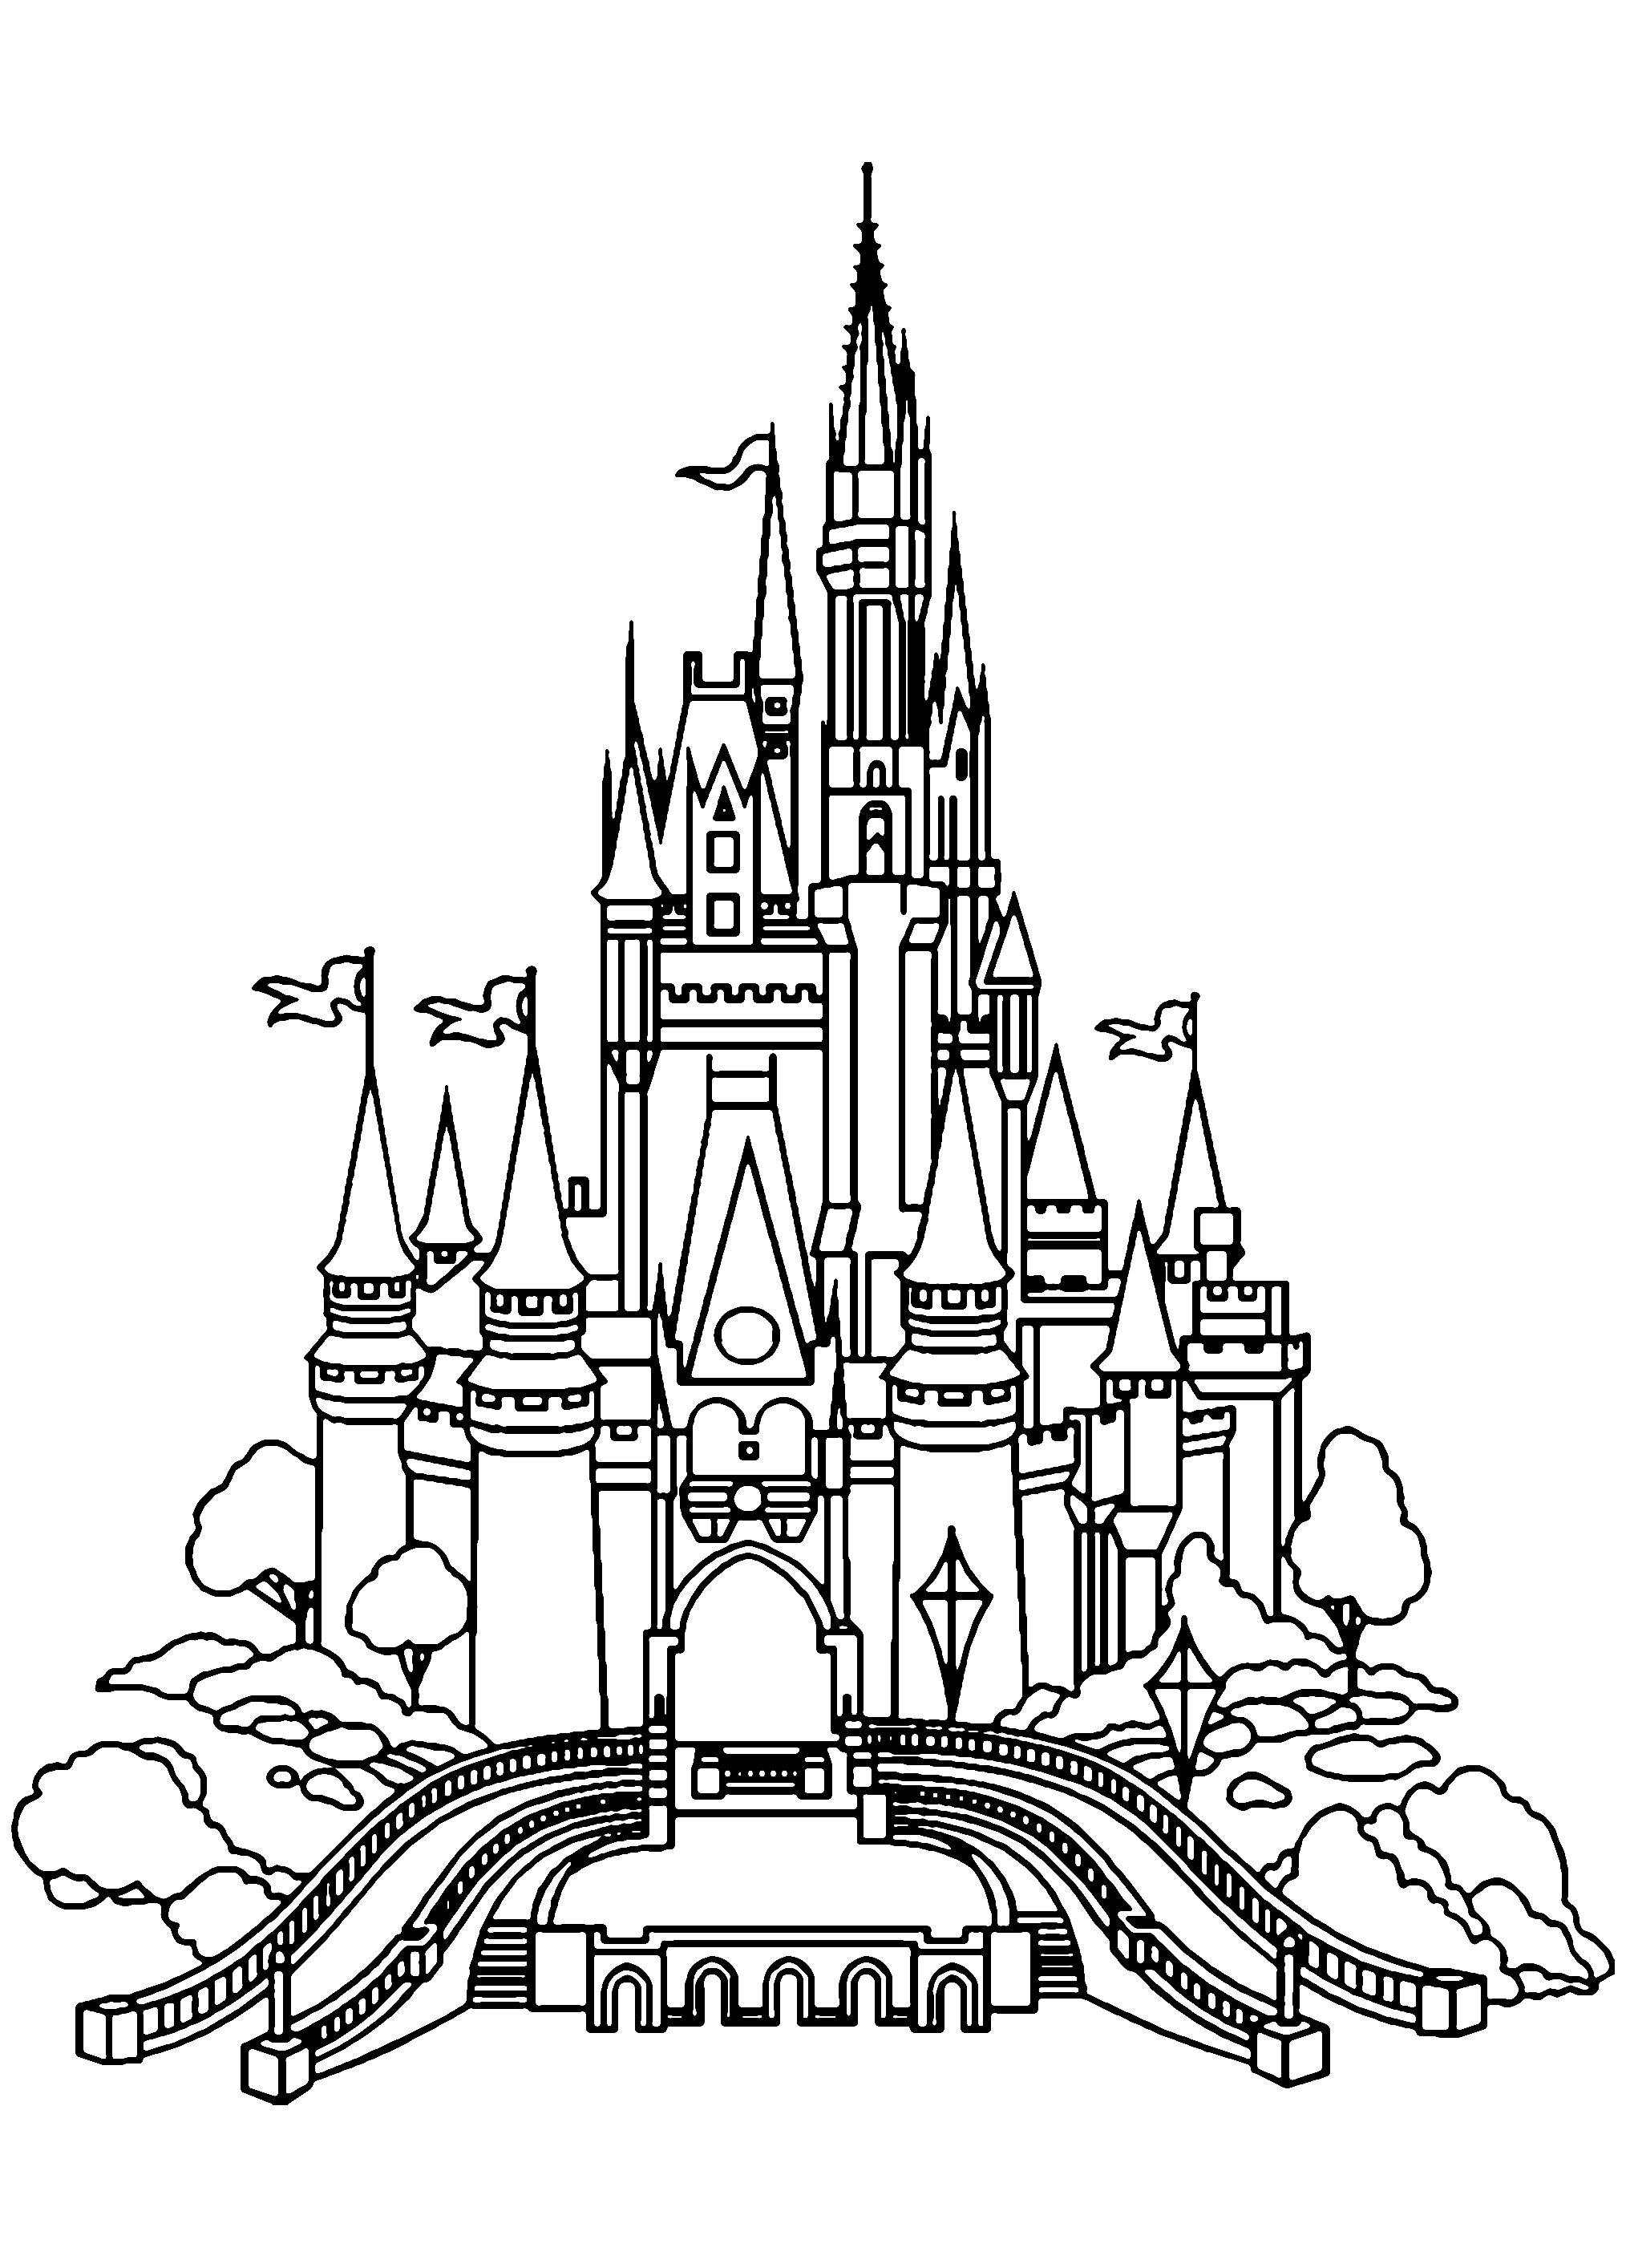 Coloring page of the Disneyland Castle, in vectorial style